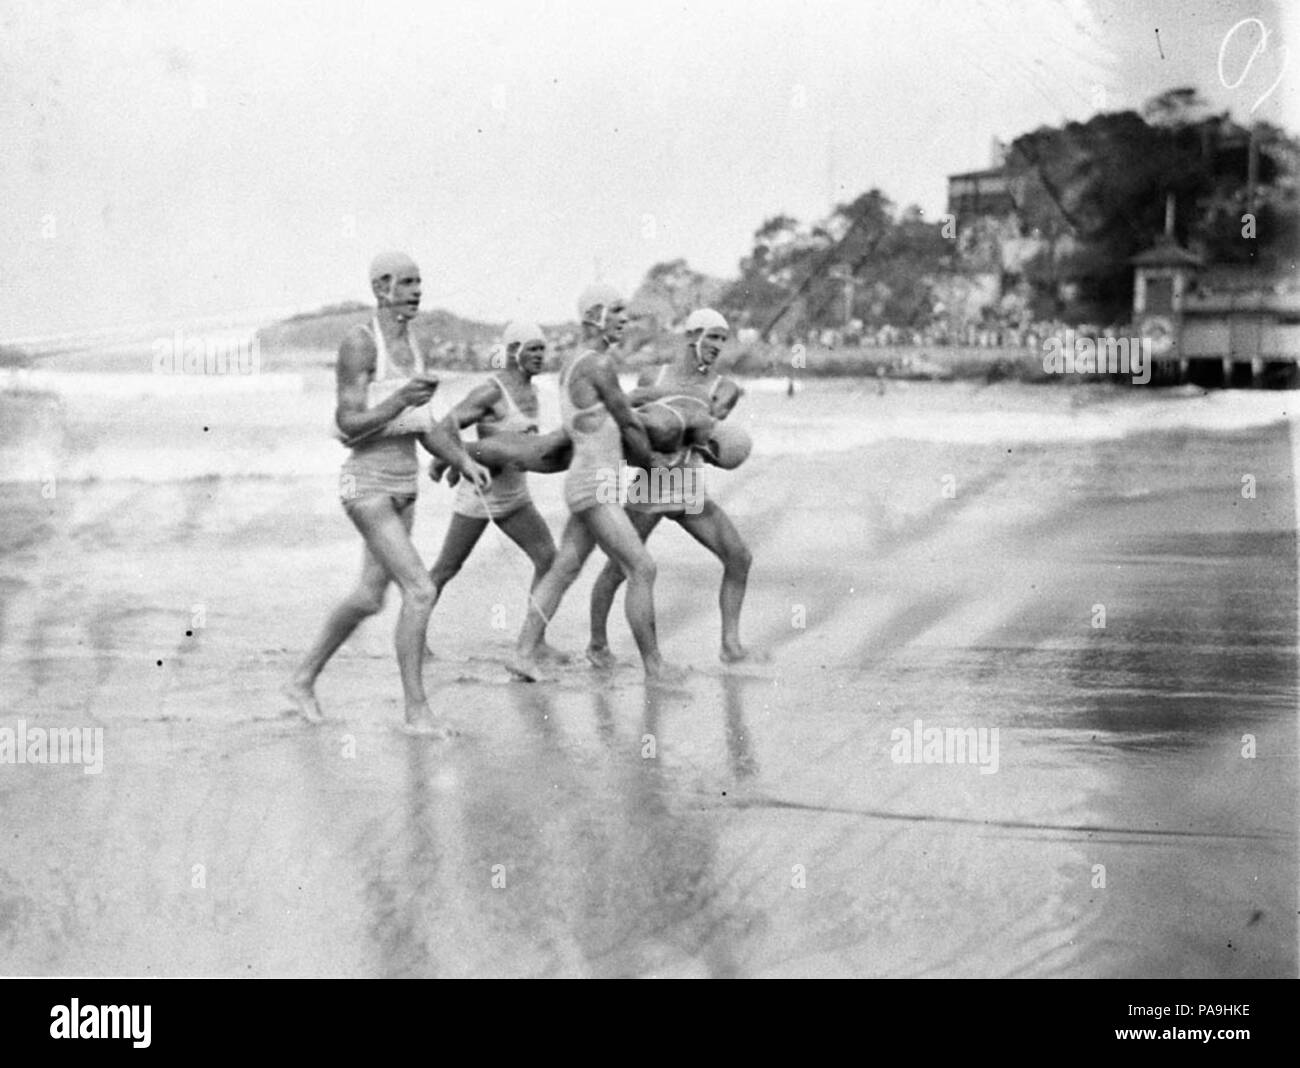 235 SLNSW 10246 Surf life saving R and R team at a carnival Manly Stock Photo